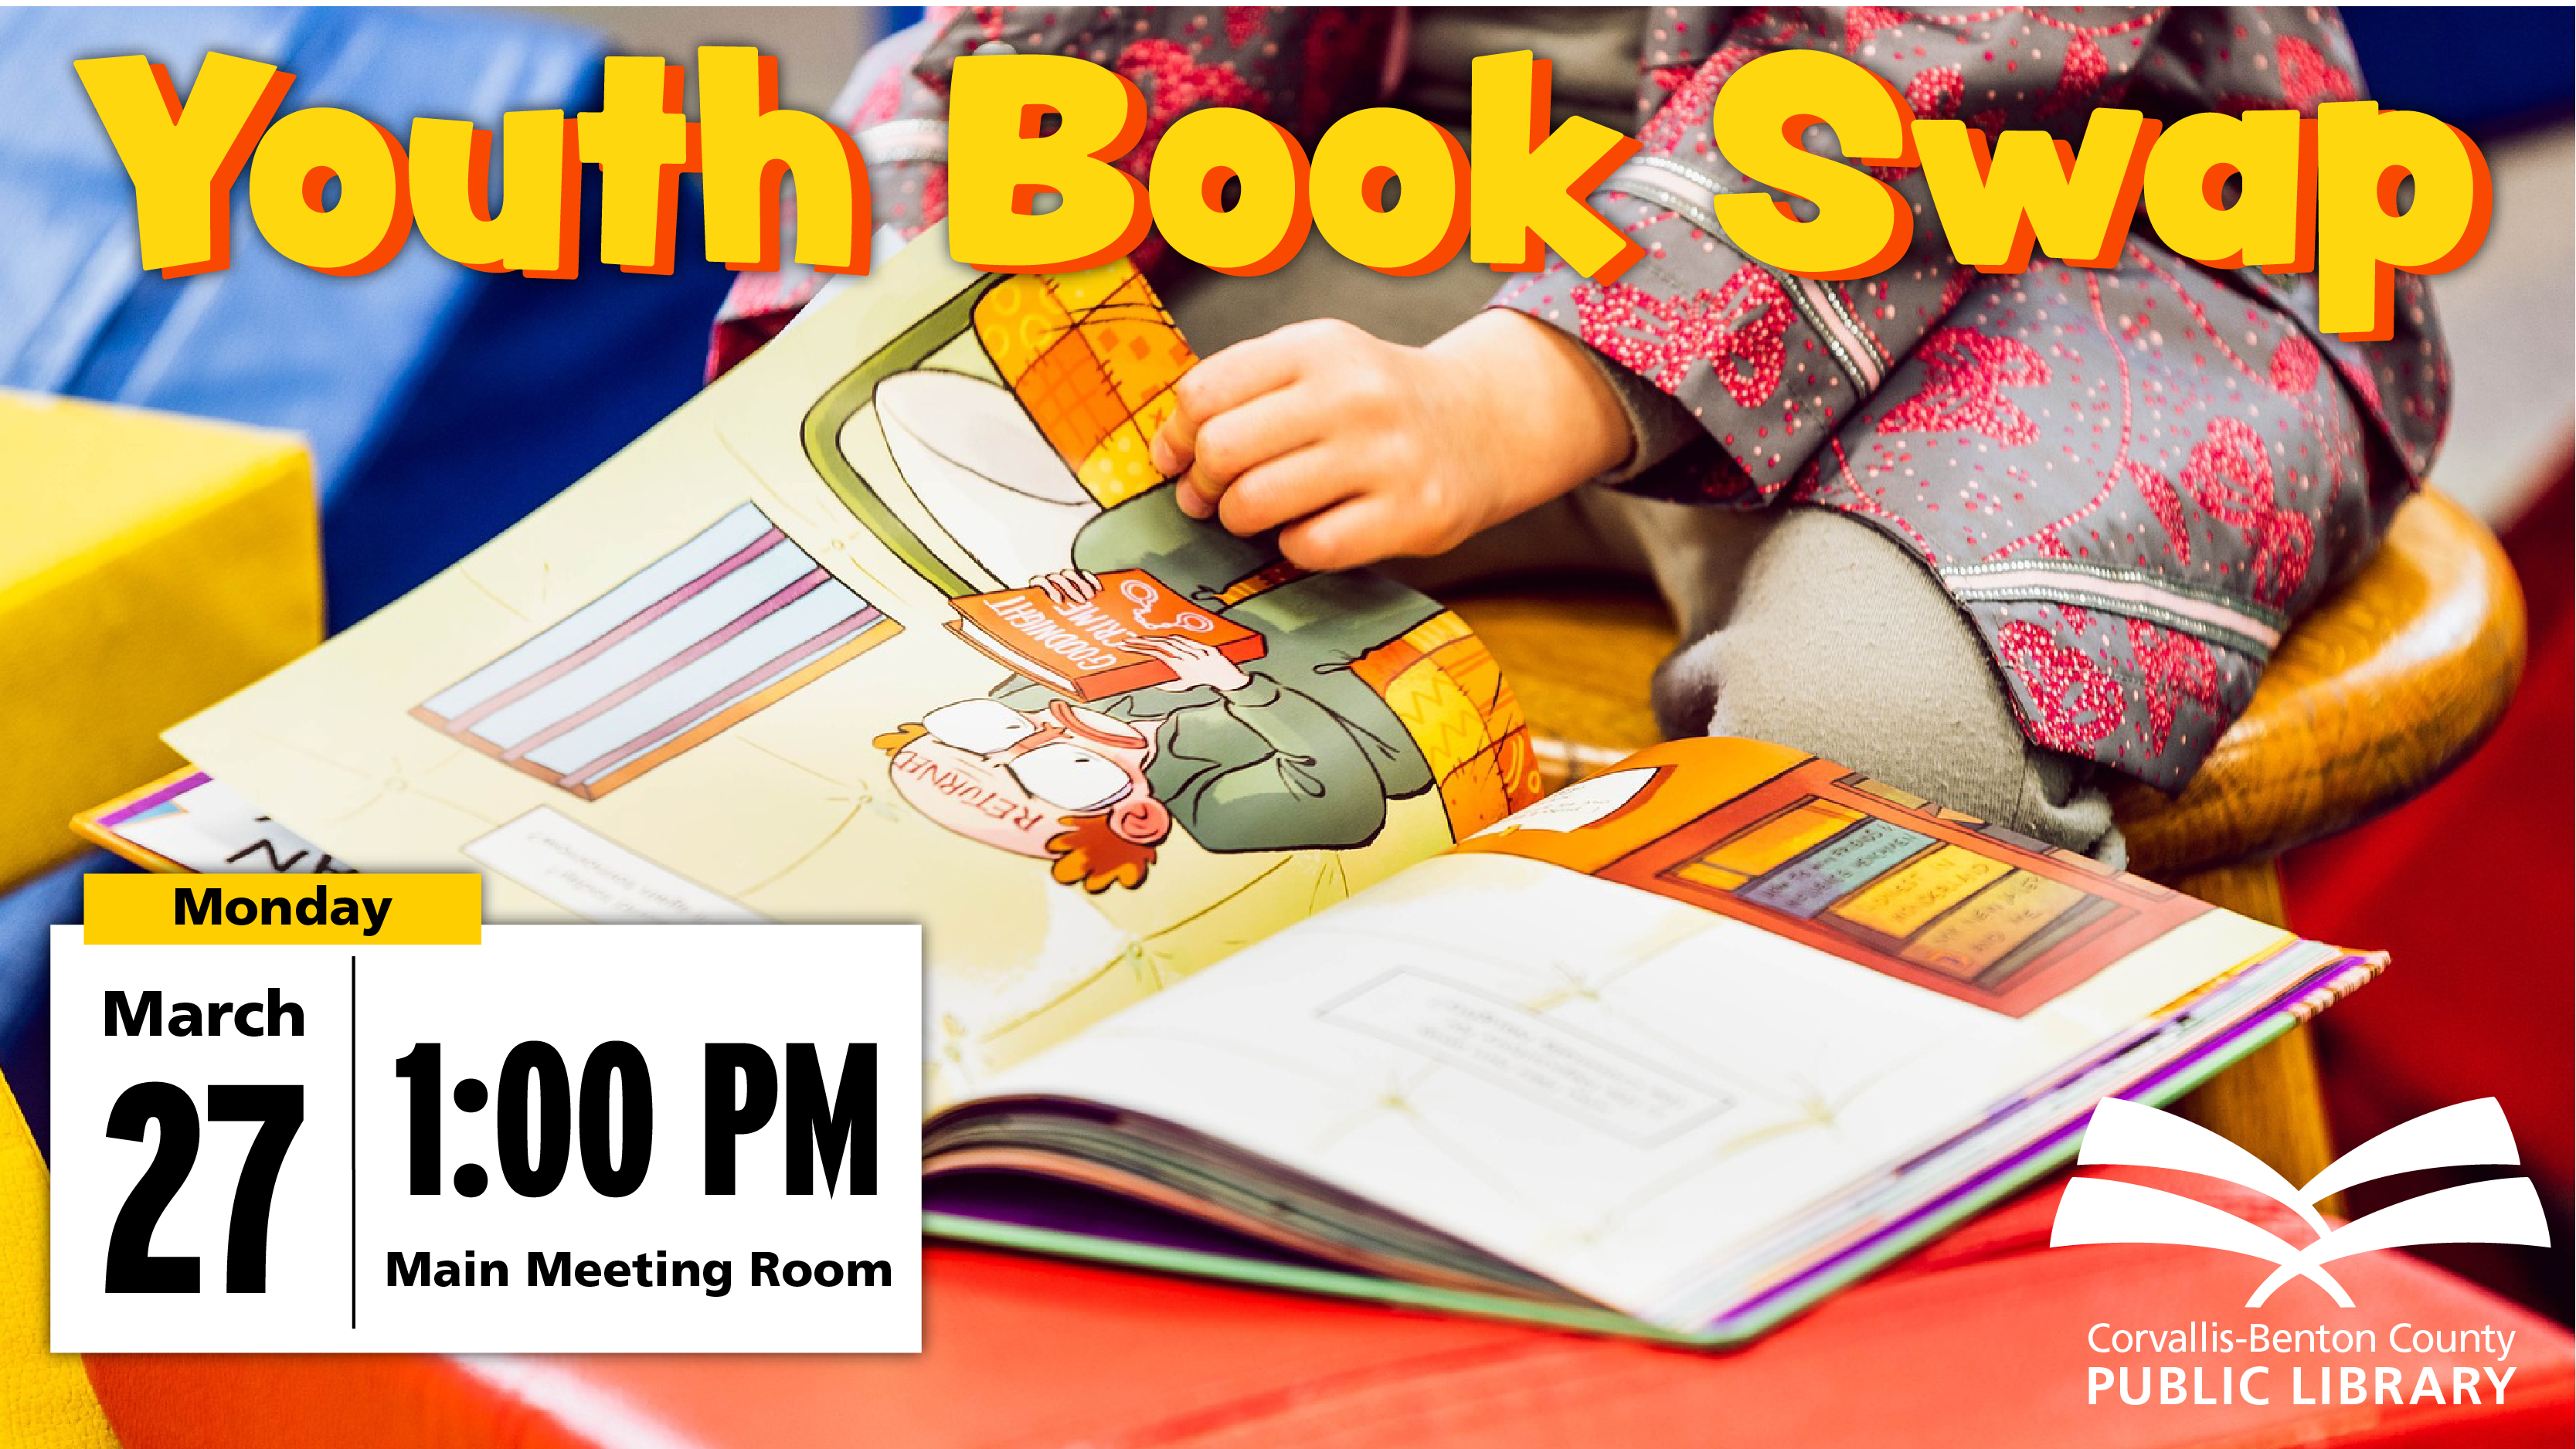 Youth Book Swap, March 27, 1 PM, Main Meeting Room